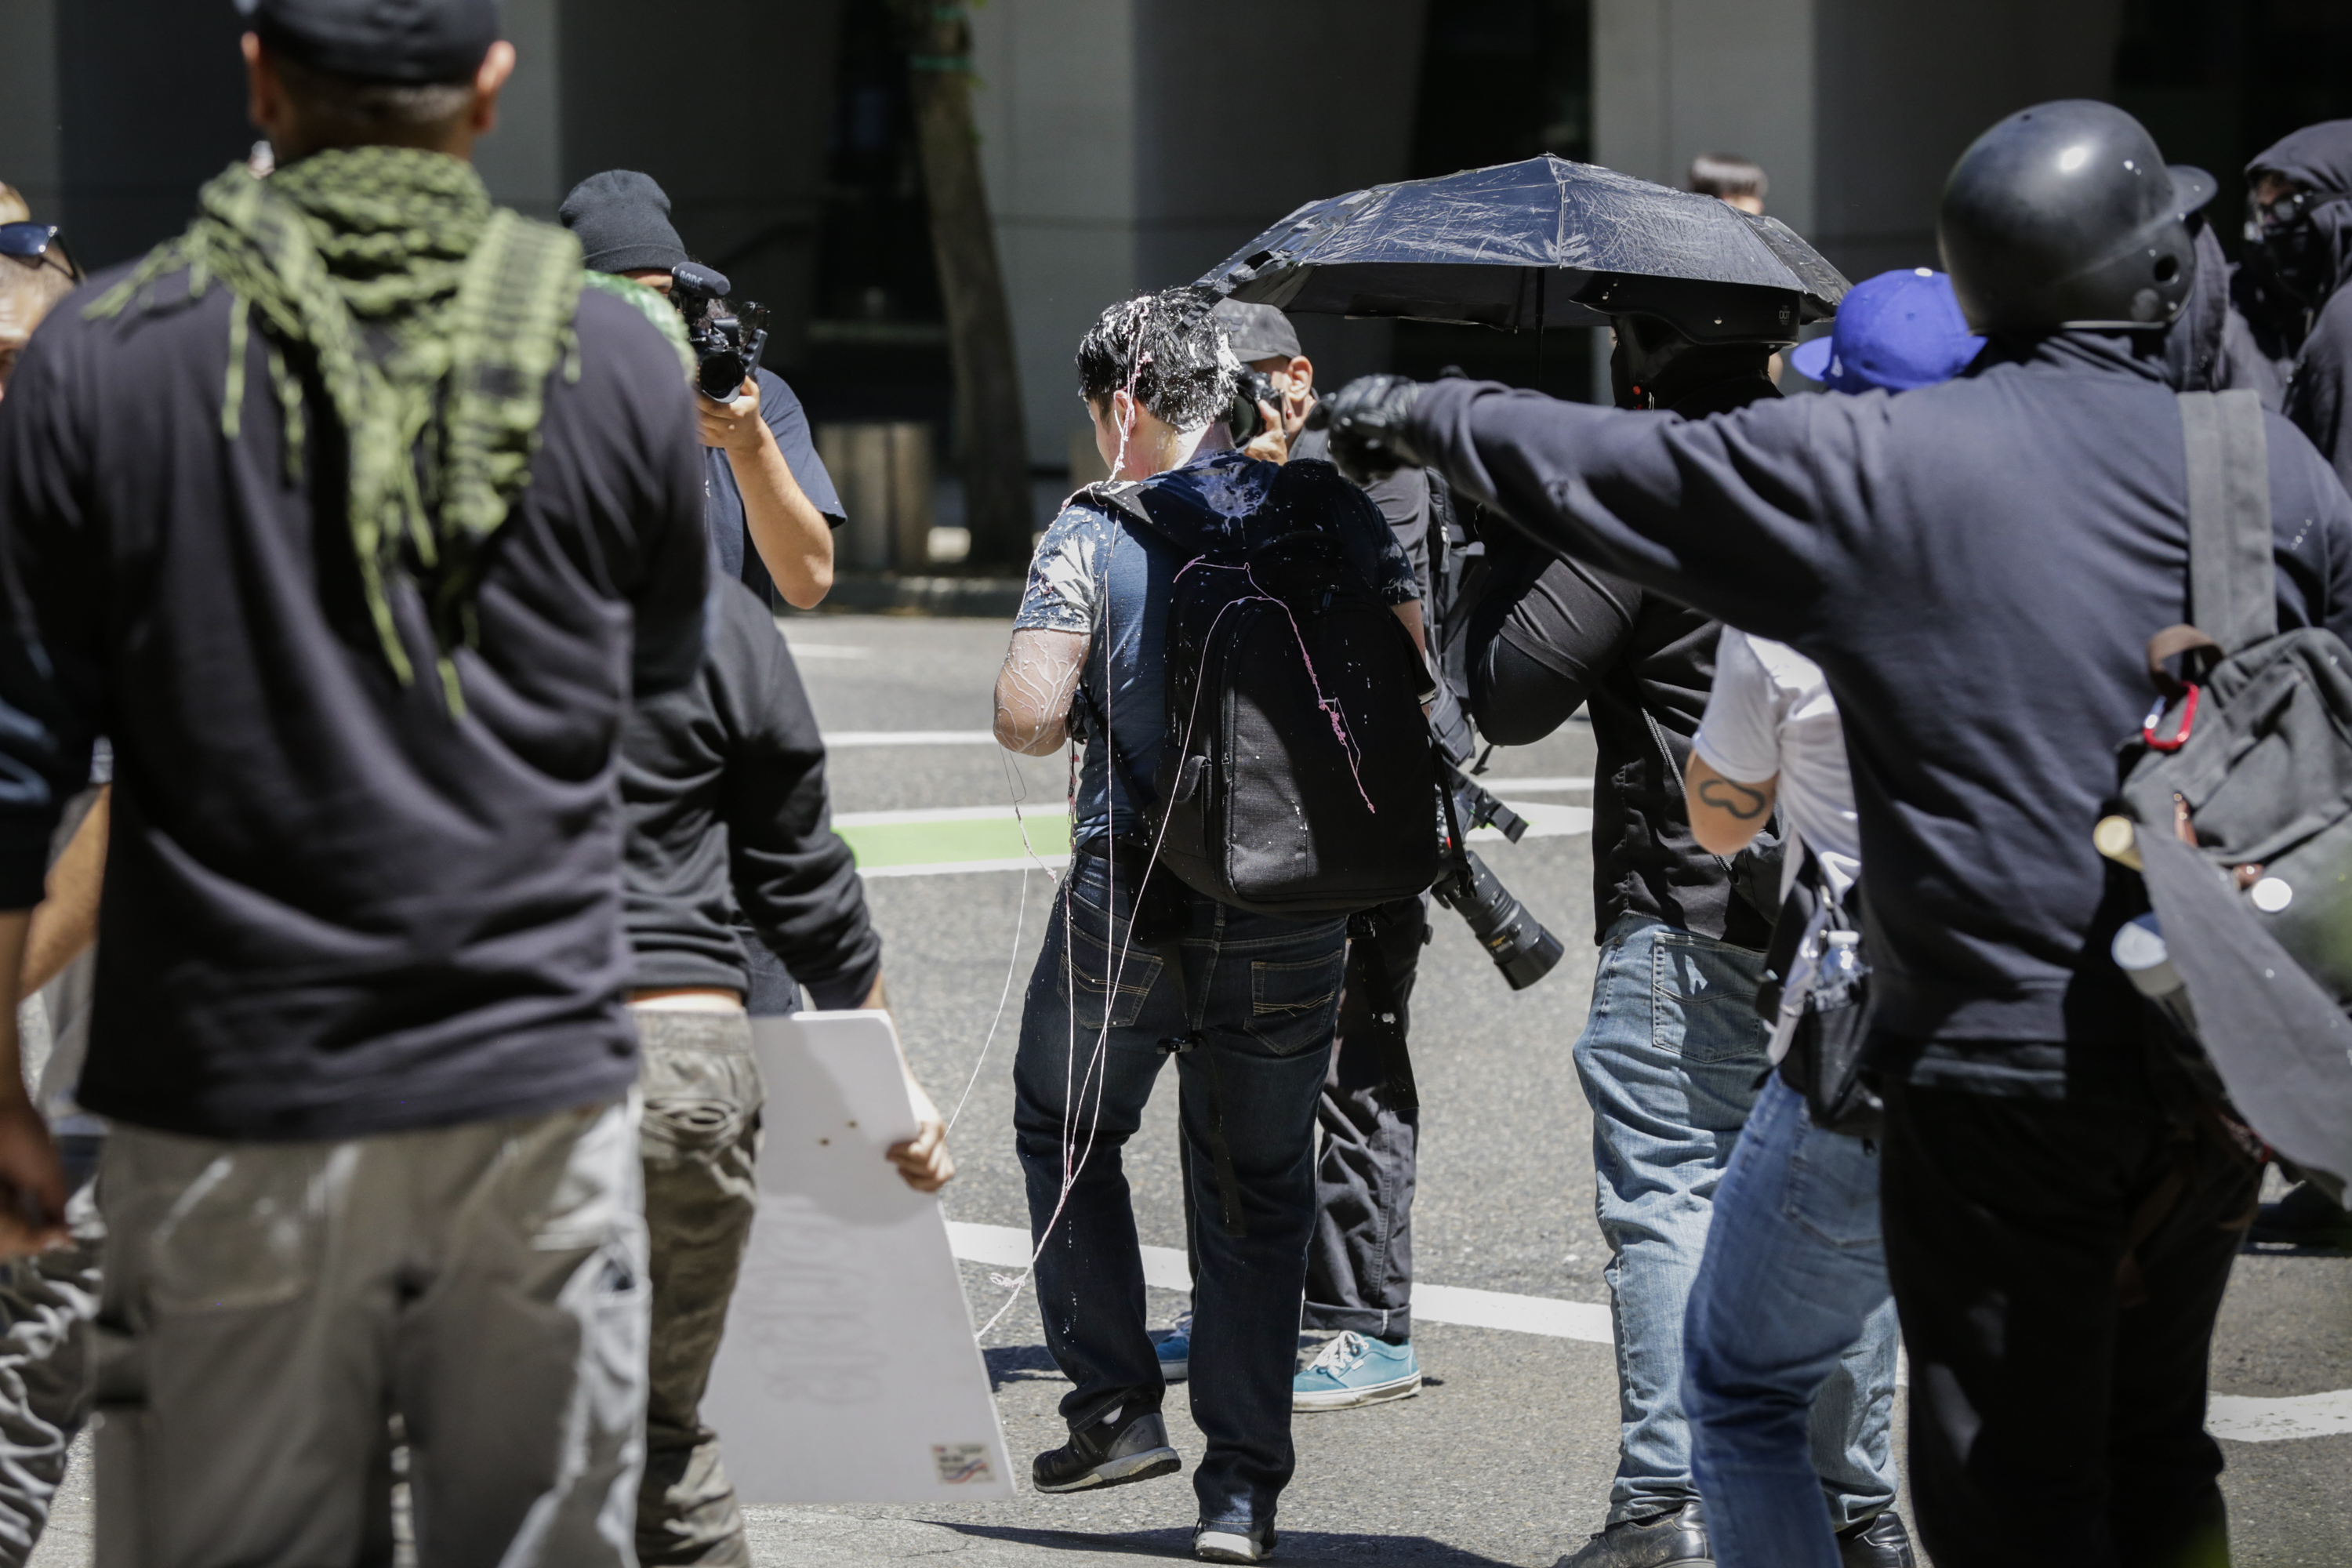 Andy Ngo, a Portland-based journalist, is seen covered in an unknown substance after unidentified Rose City Antifa members attacked him on June 29, 2019 in Portland, Oregon. (Moriah Ratner/Getty Images)